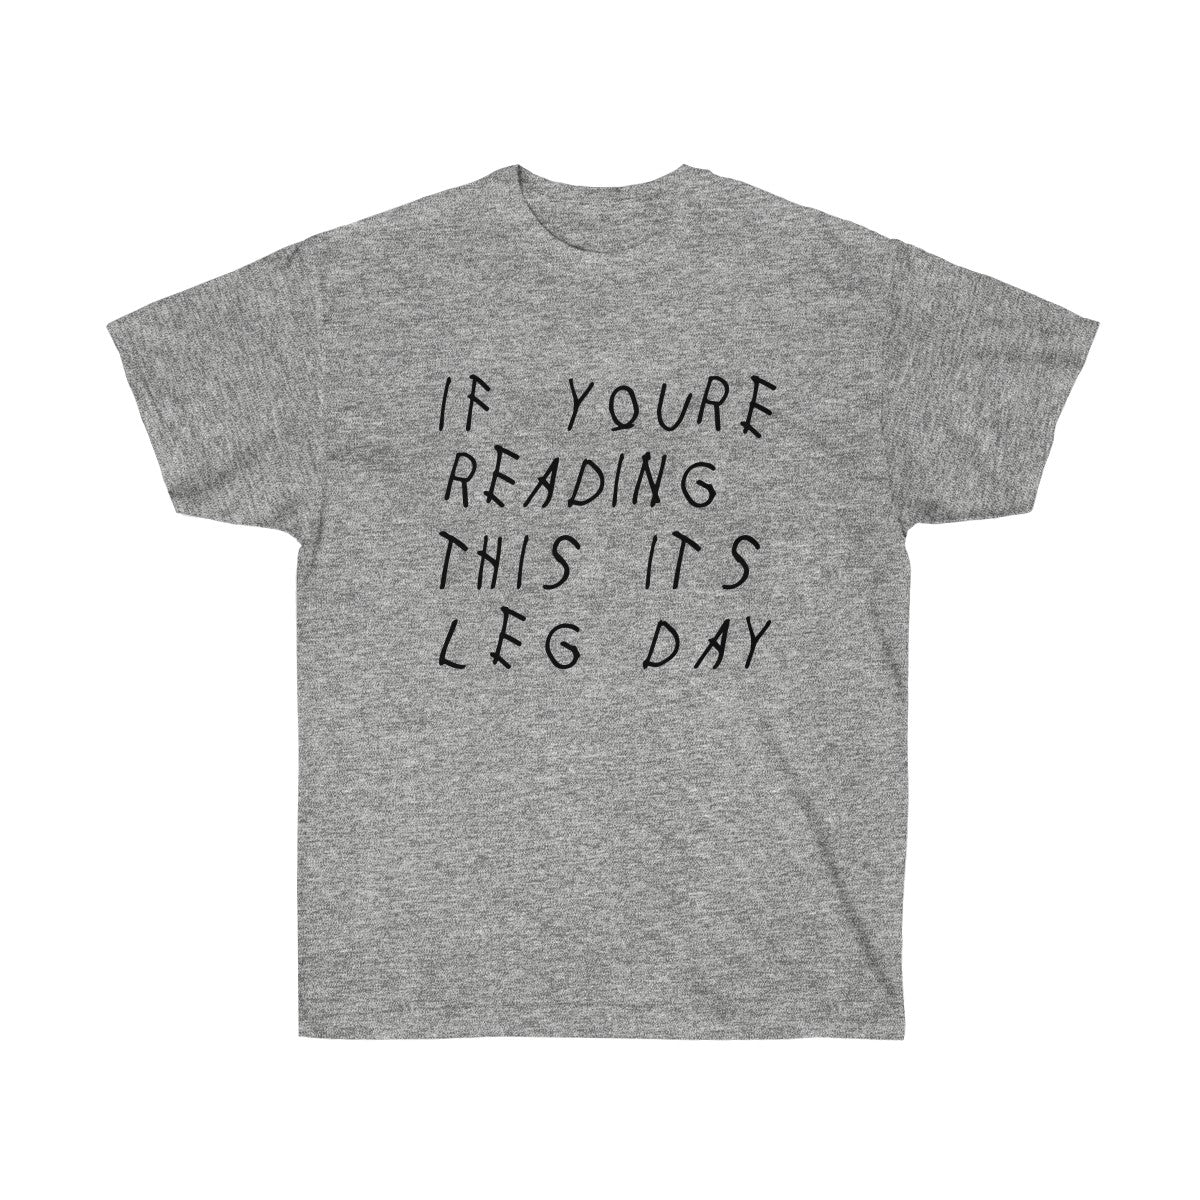 If your reading this it's leg day Drake inspired workout Tee-Sport Grey-S-Archethype